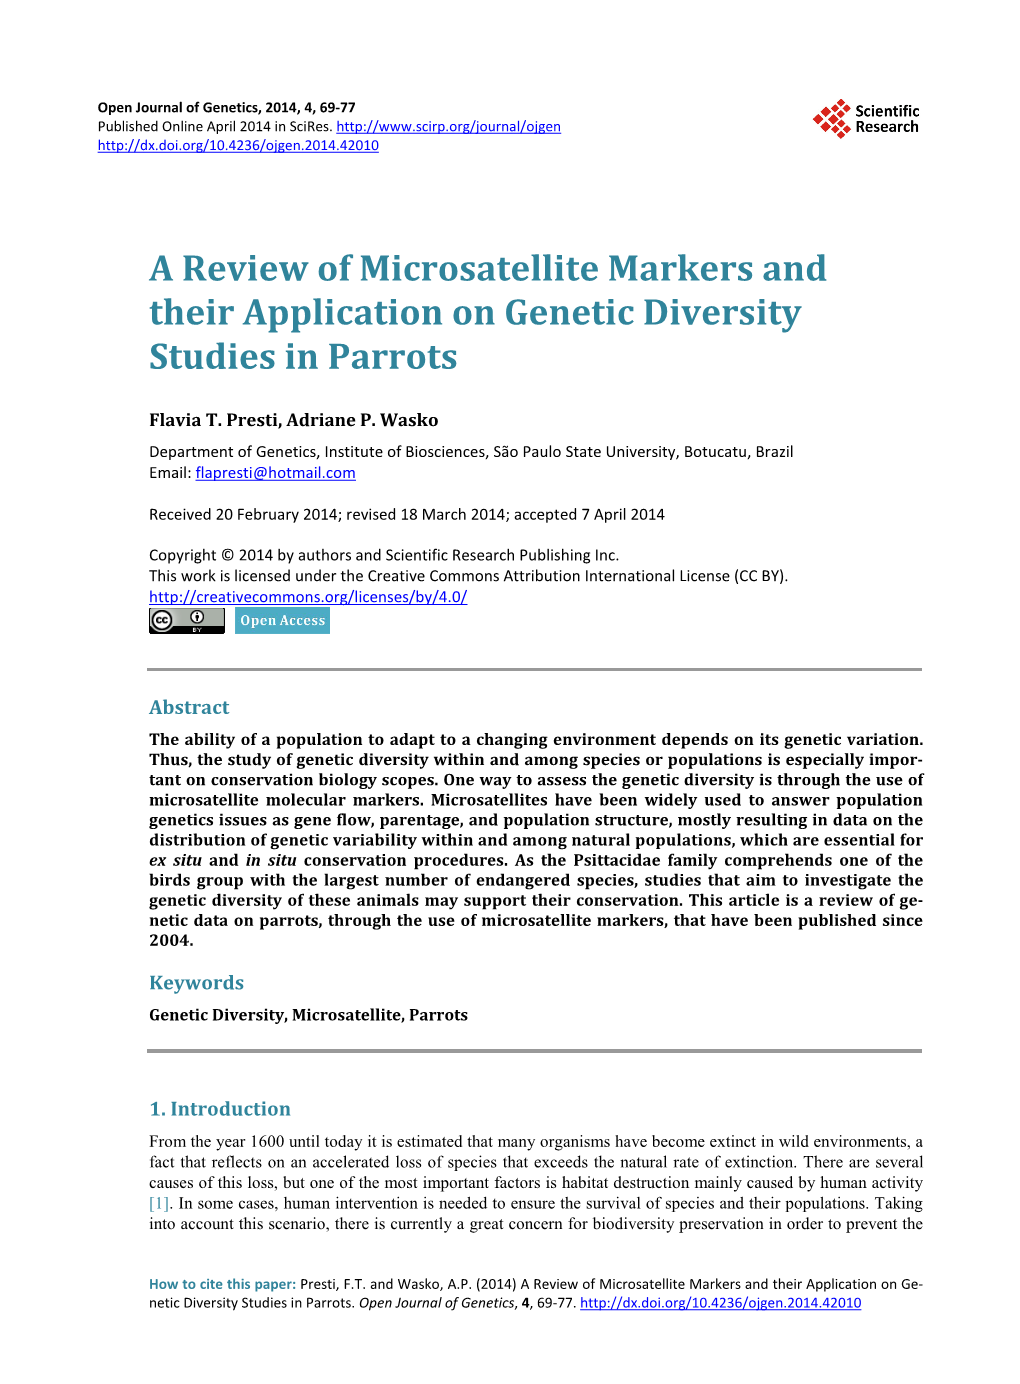 A Review of Microsatellite Markers and Their Application on Genetic Diversity Studies in Parrots